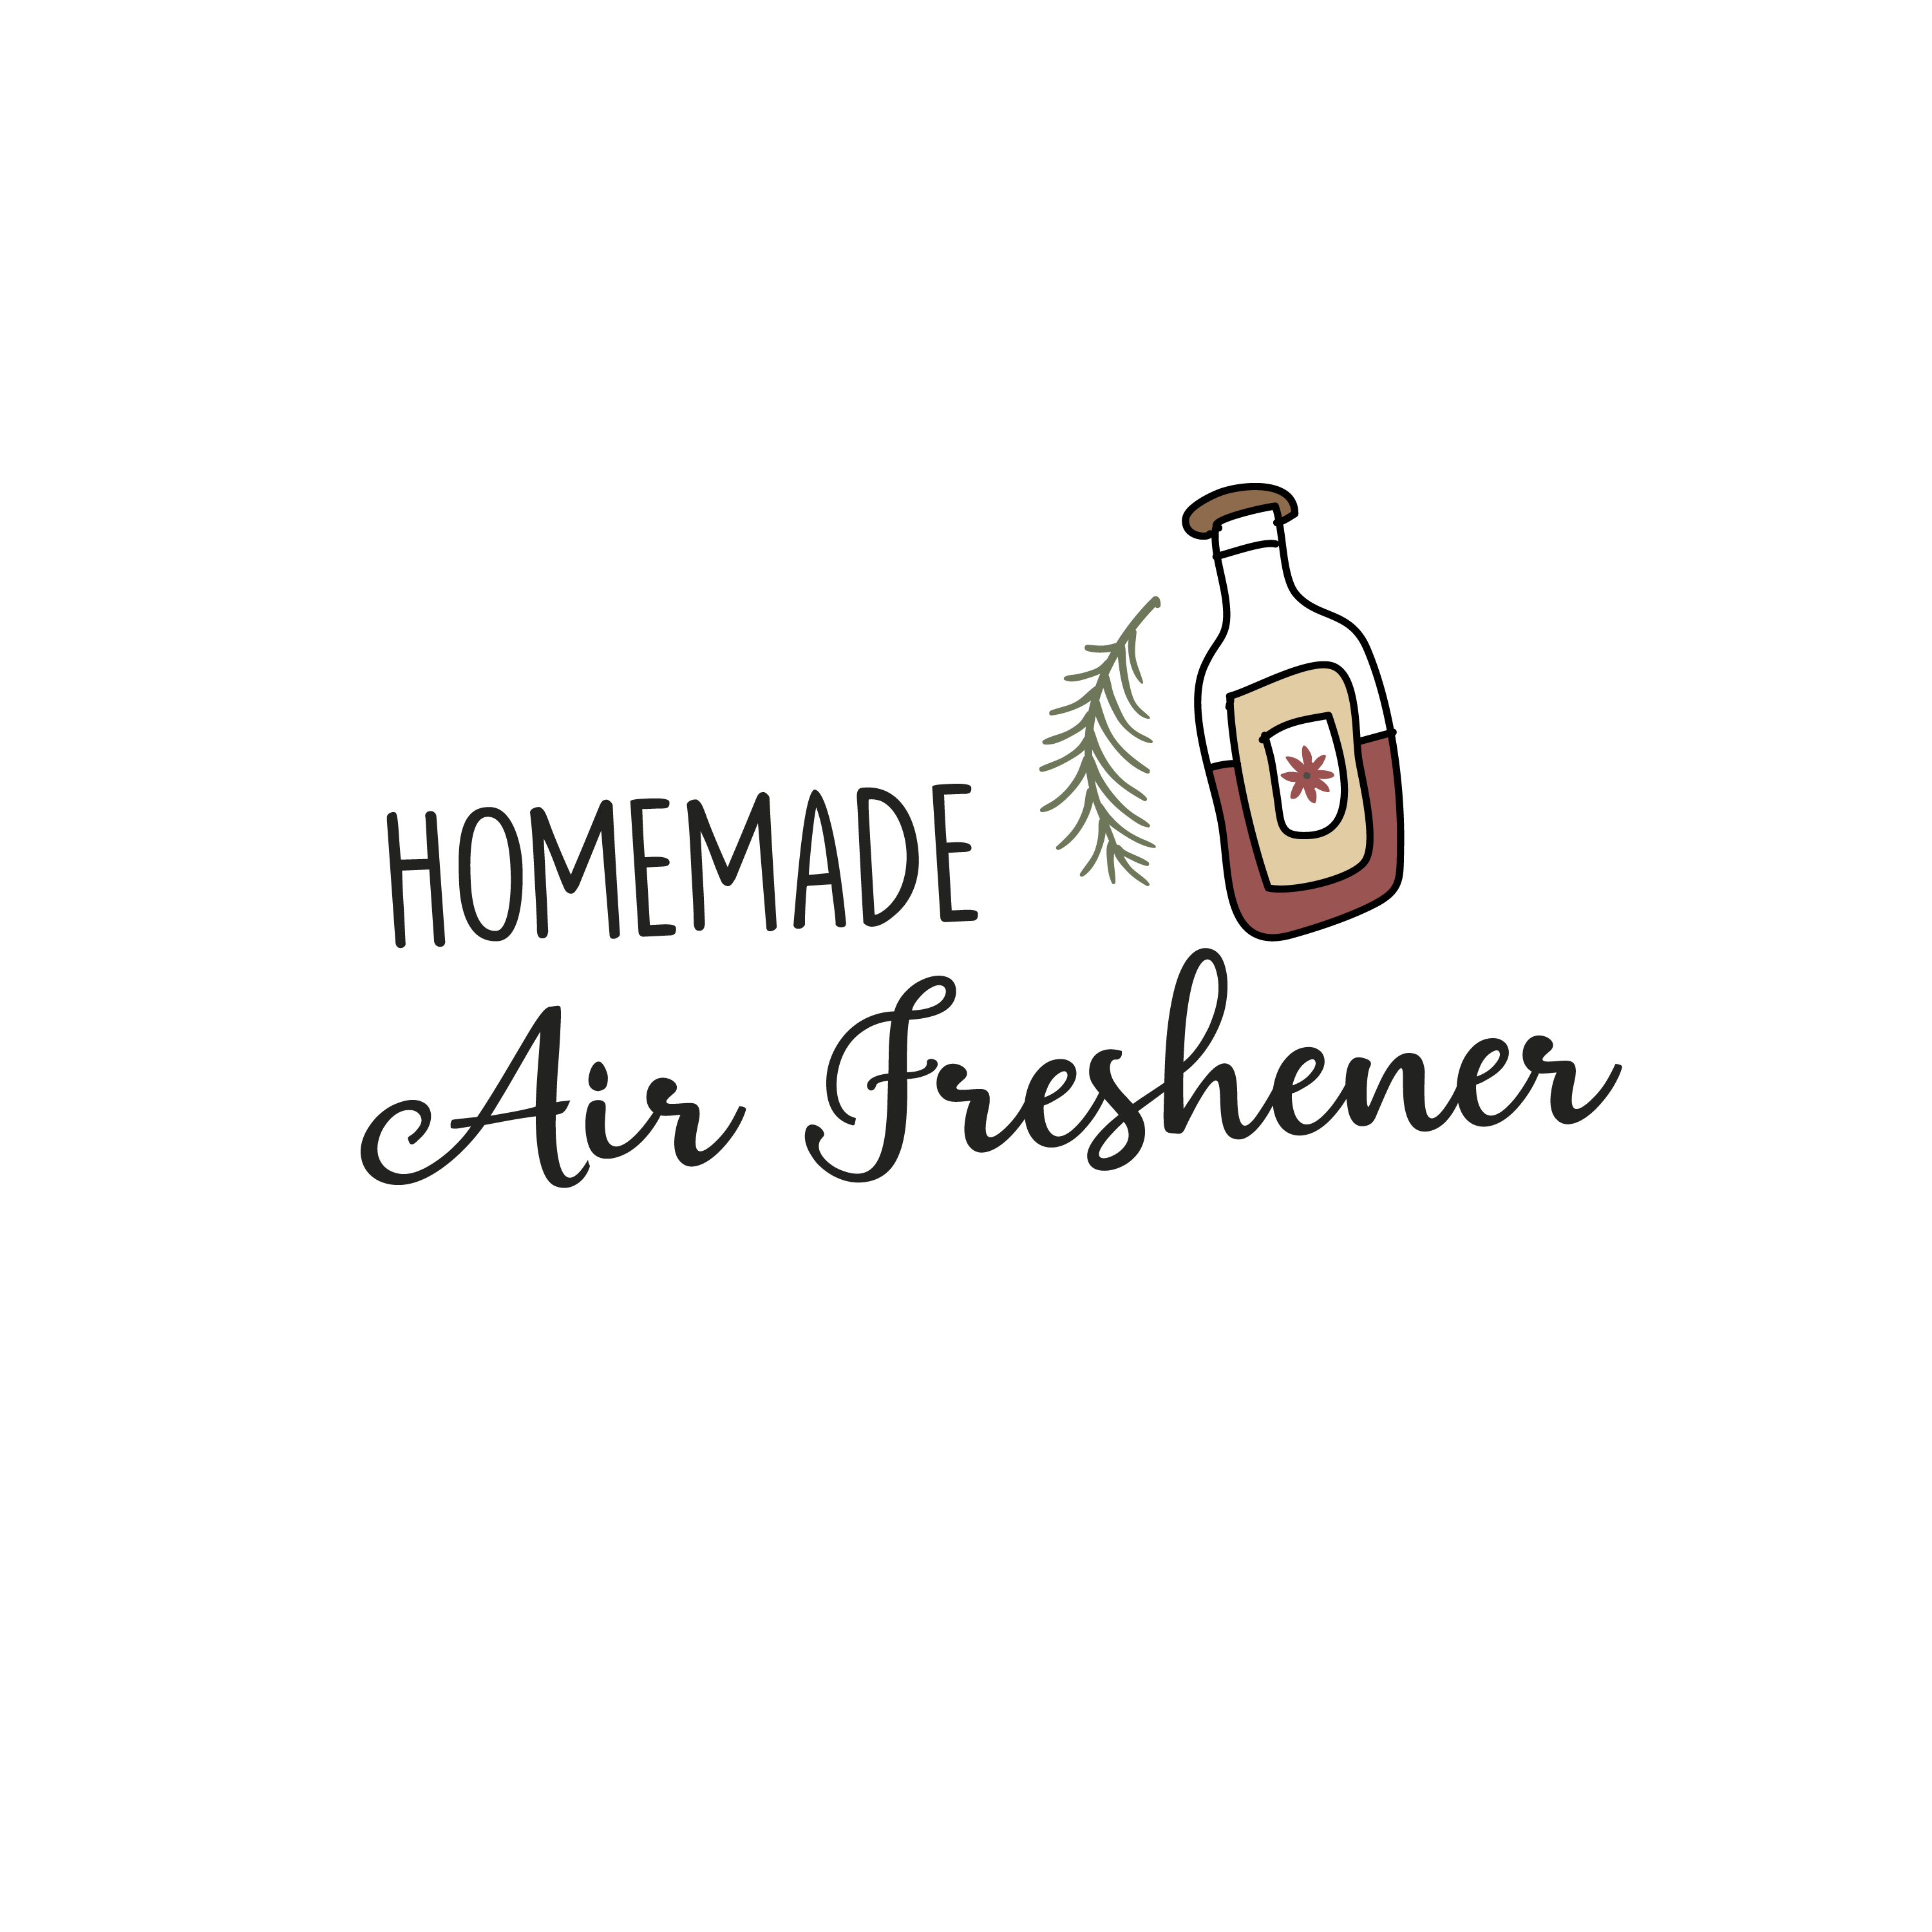 English version of the logo of the homemade air freshener recipe to print made by Les Belles Combines